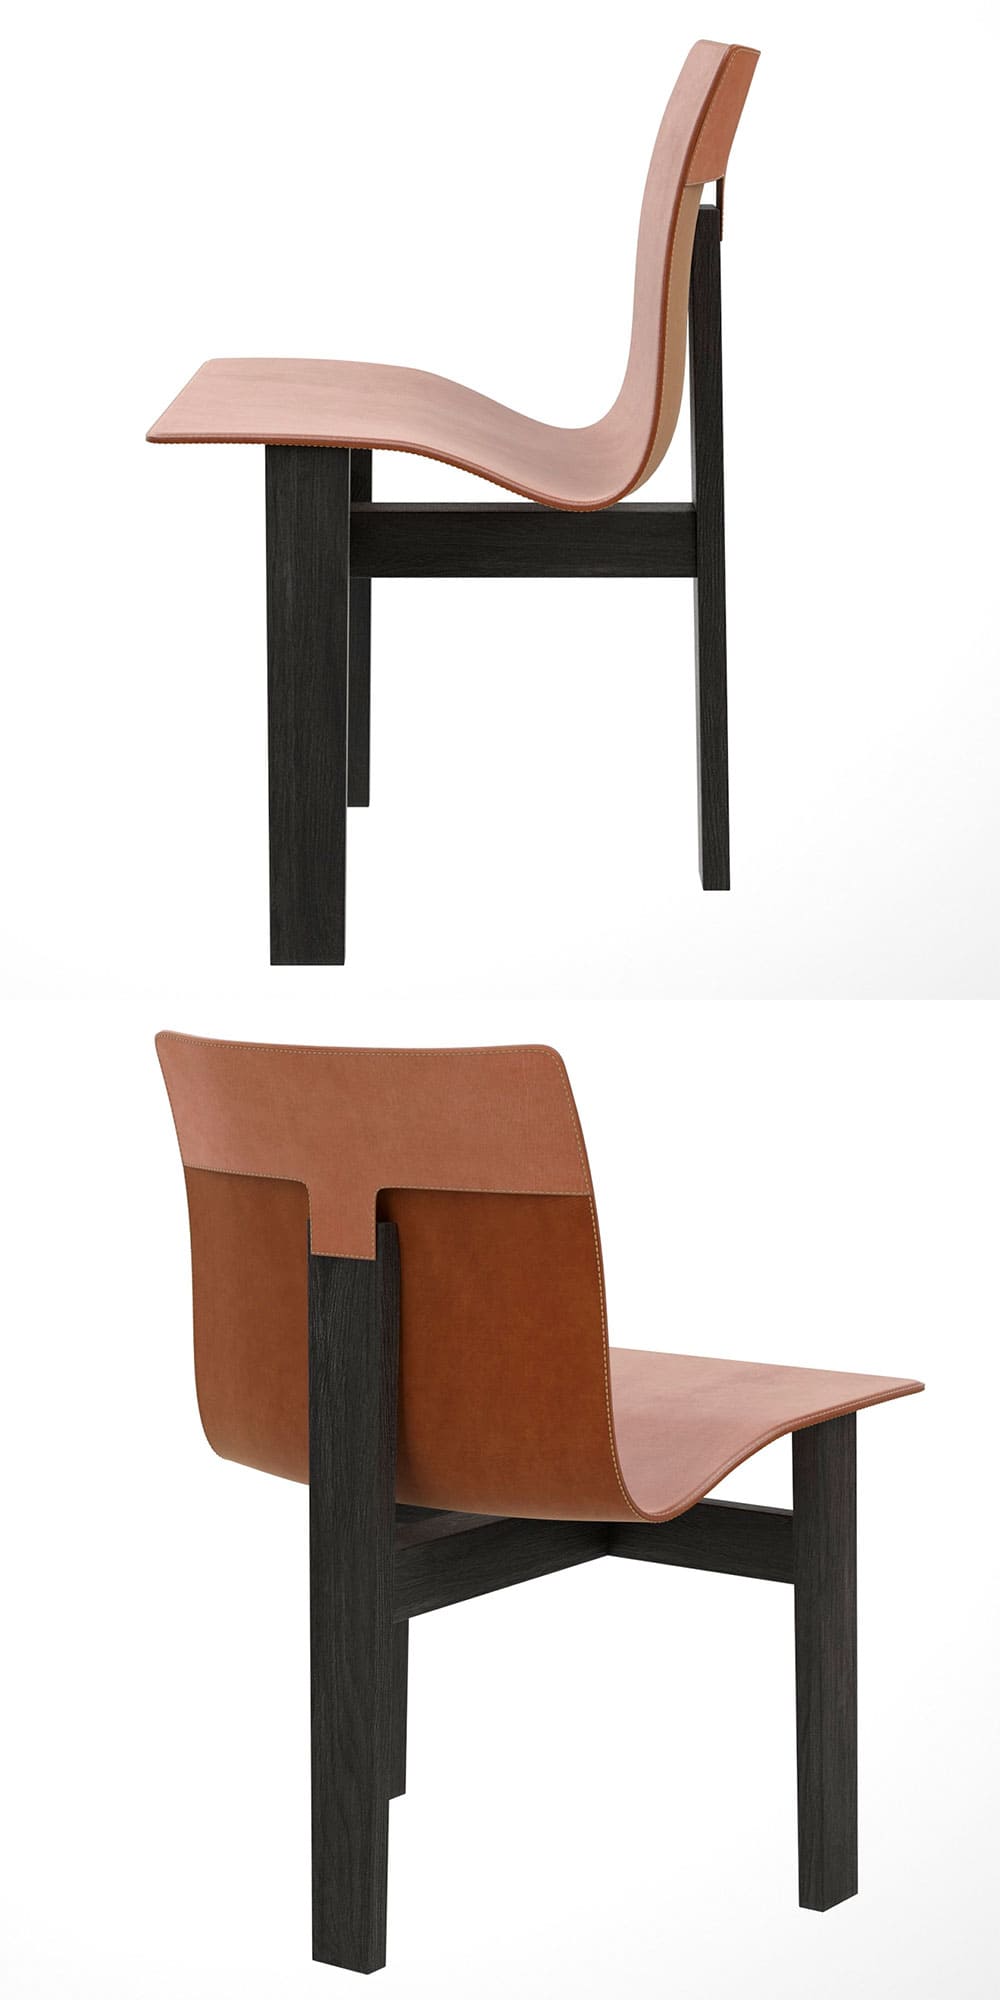 Tre 3 chair, picture for pinterest.